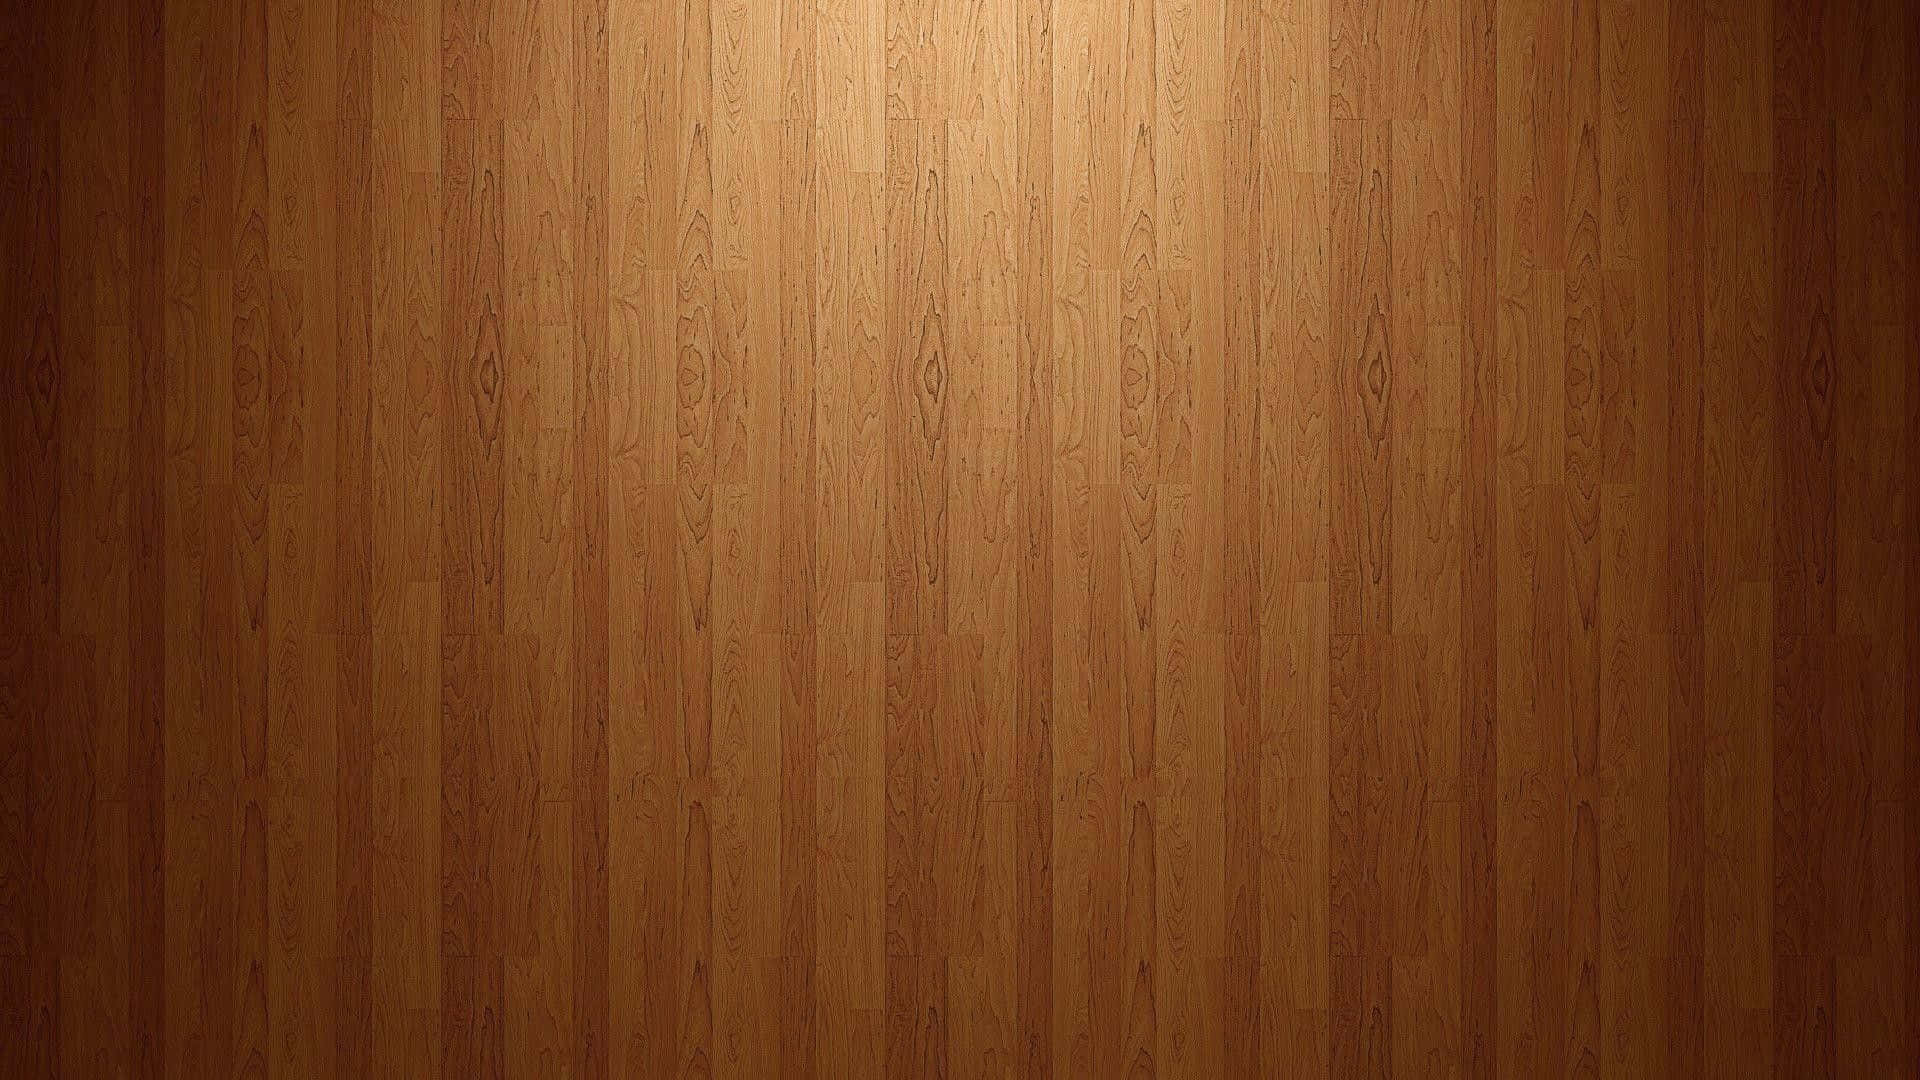 Bright Polished Wooden Background Texture